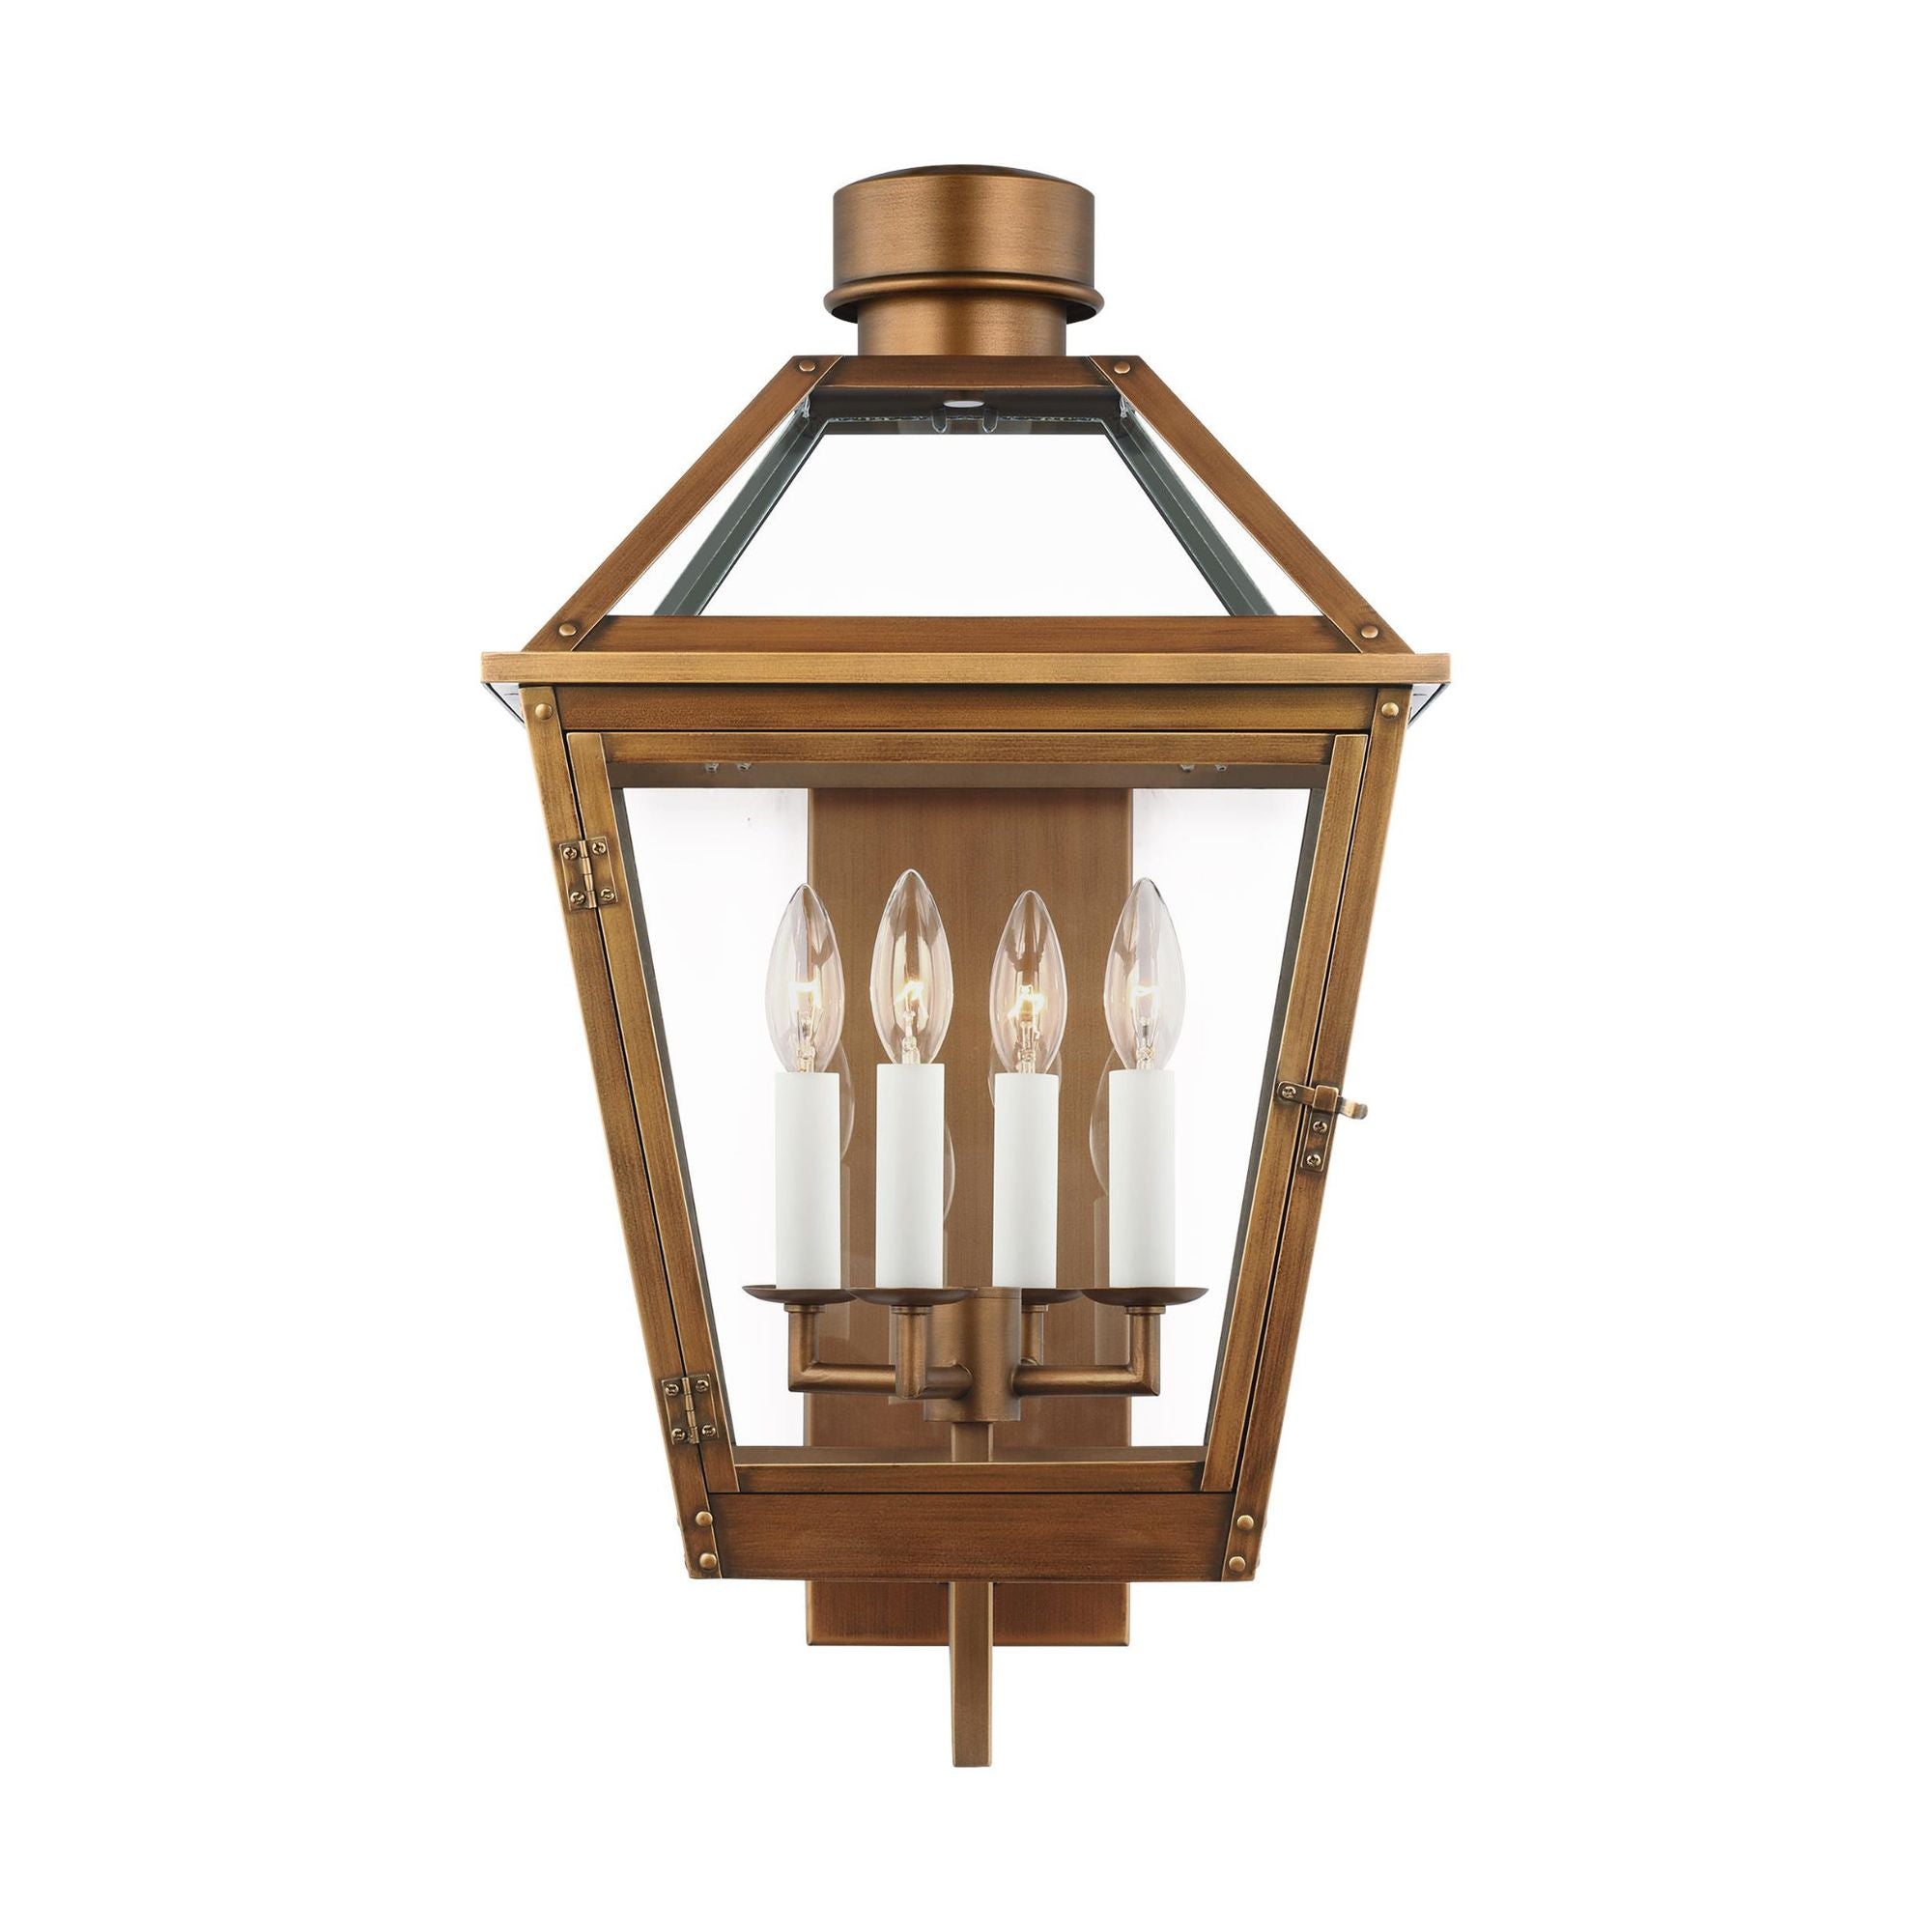 Chapman & Myers Hyannis Large Lantern in Natural Copper